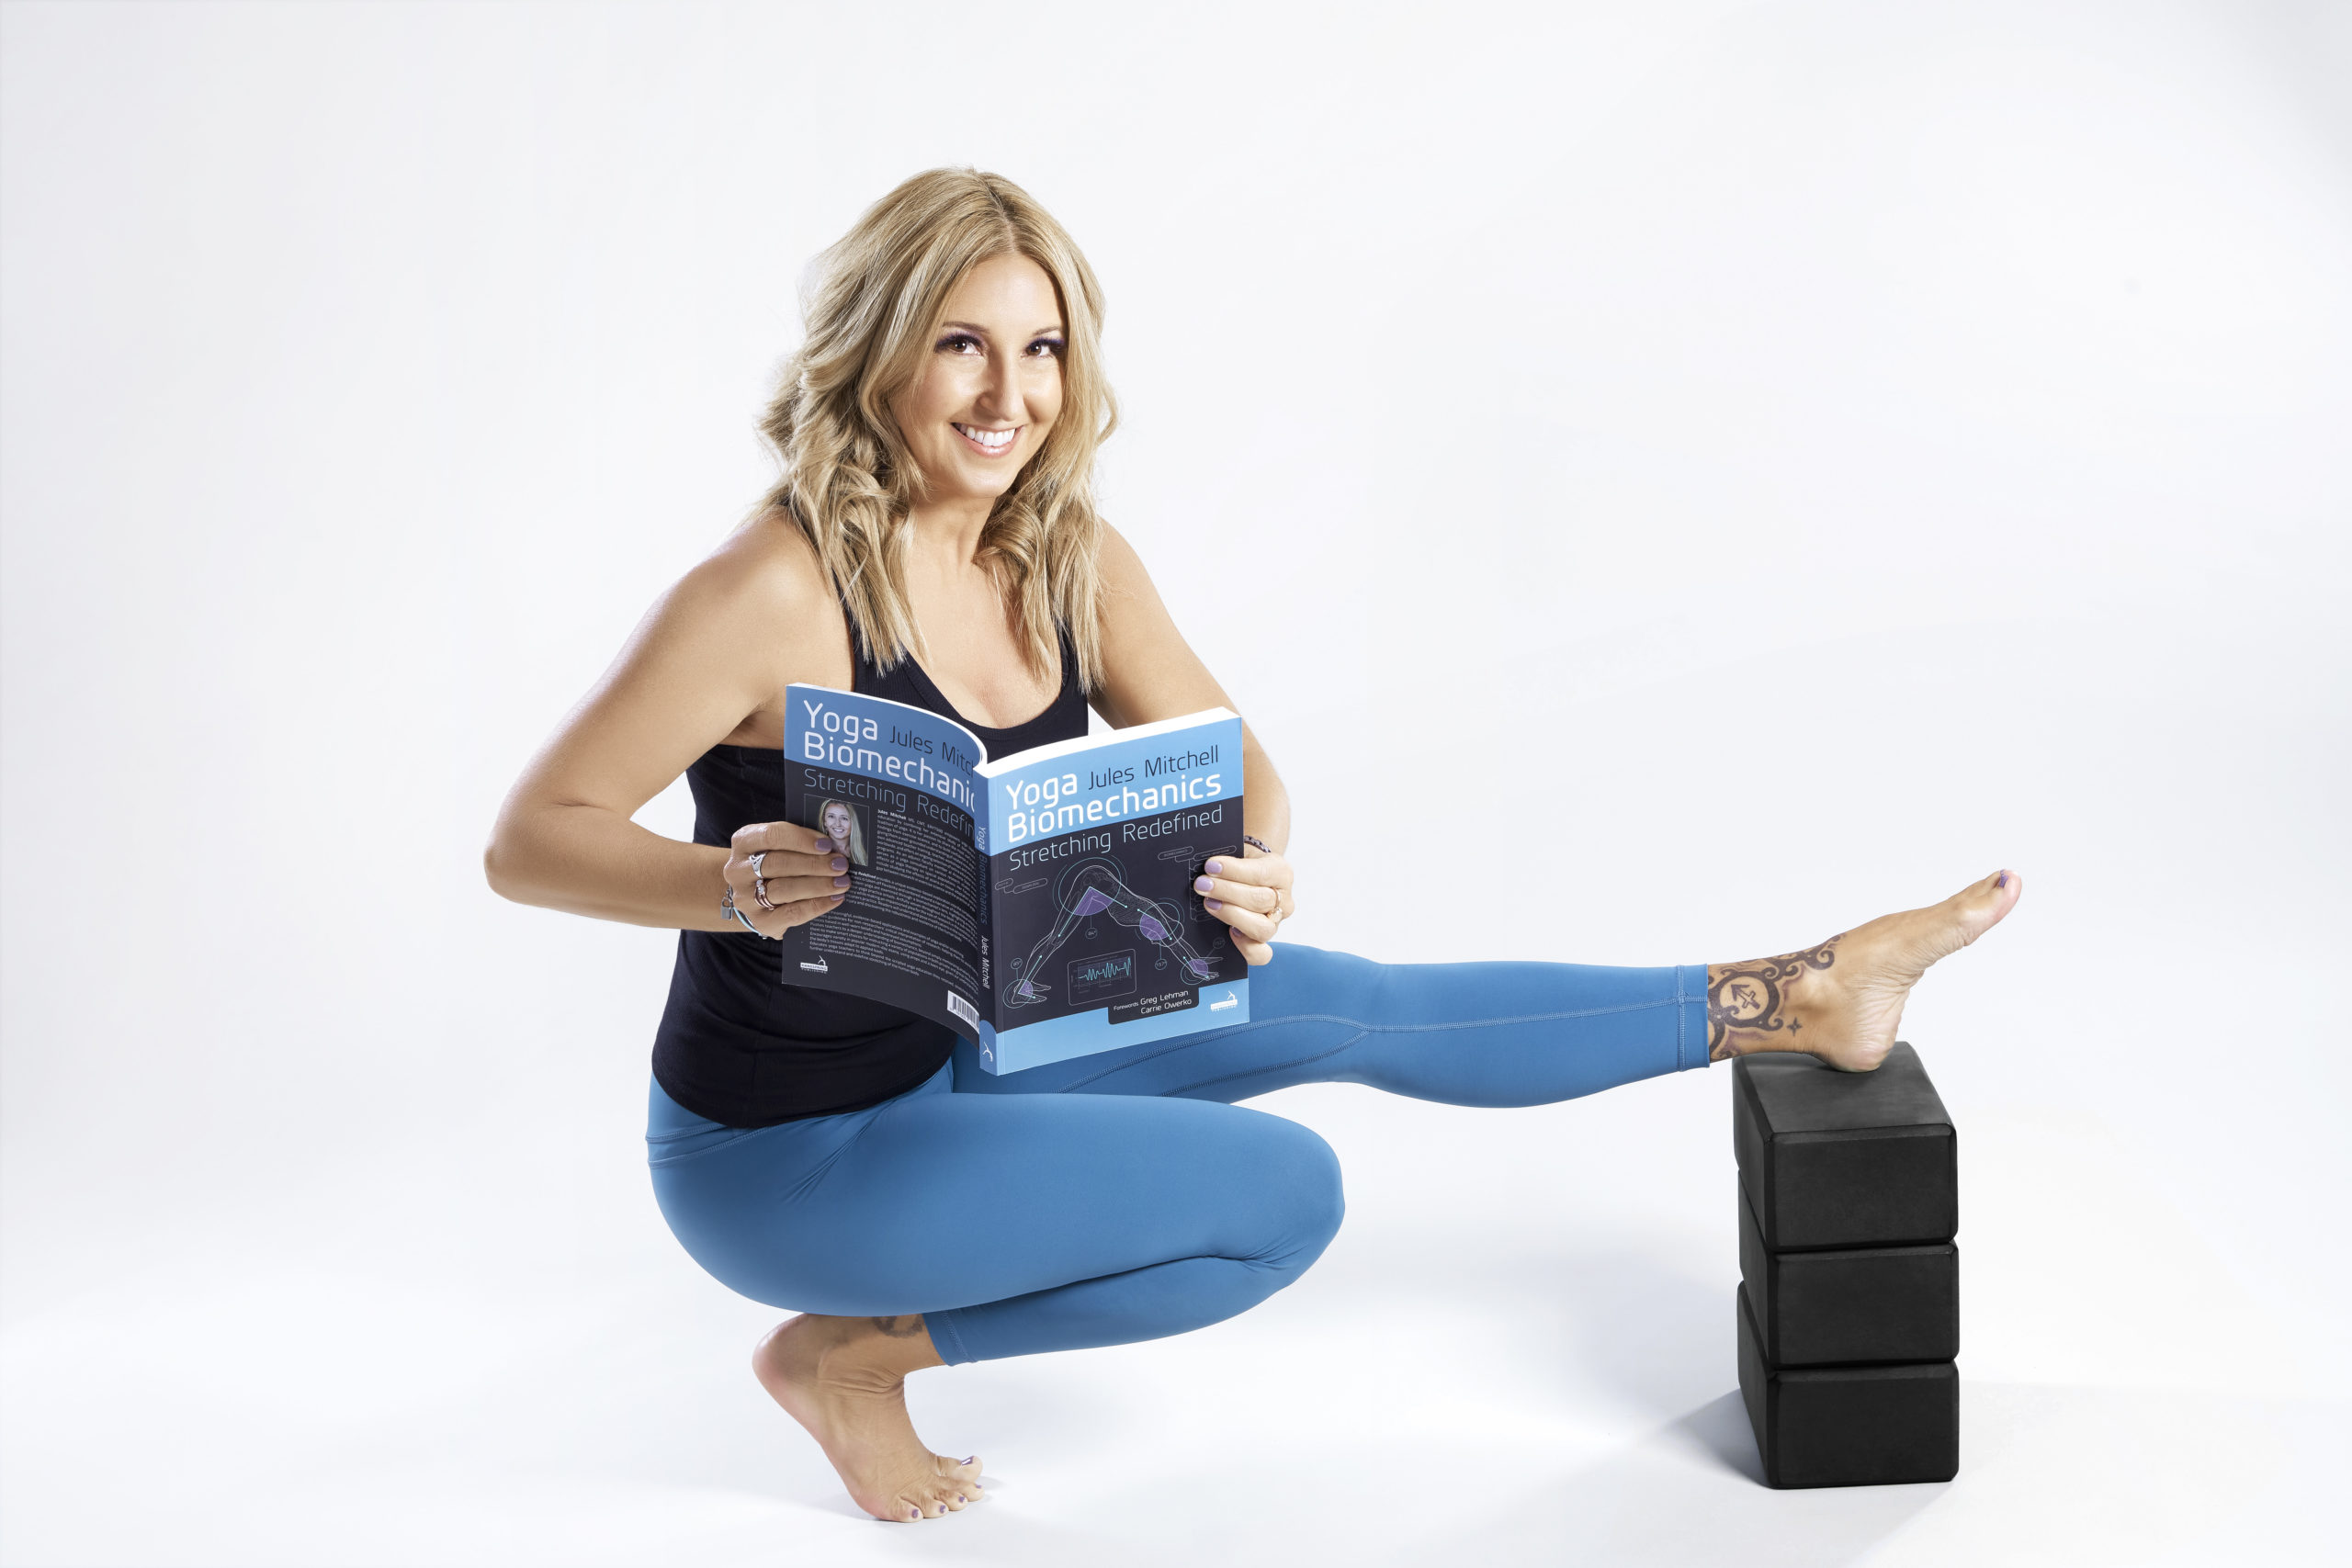 Jules is holding her book and smiling with one leg resting on some yoga blocks.